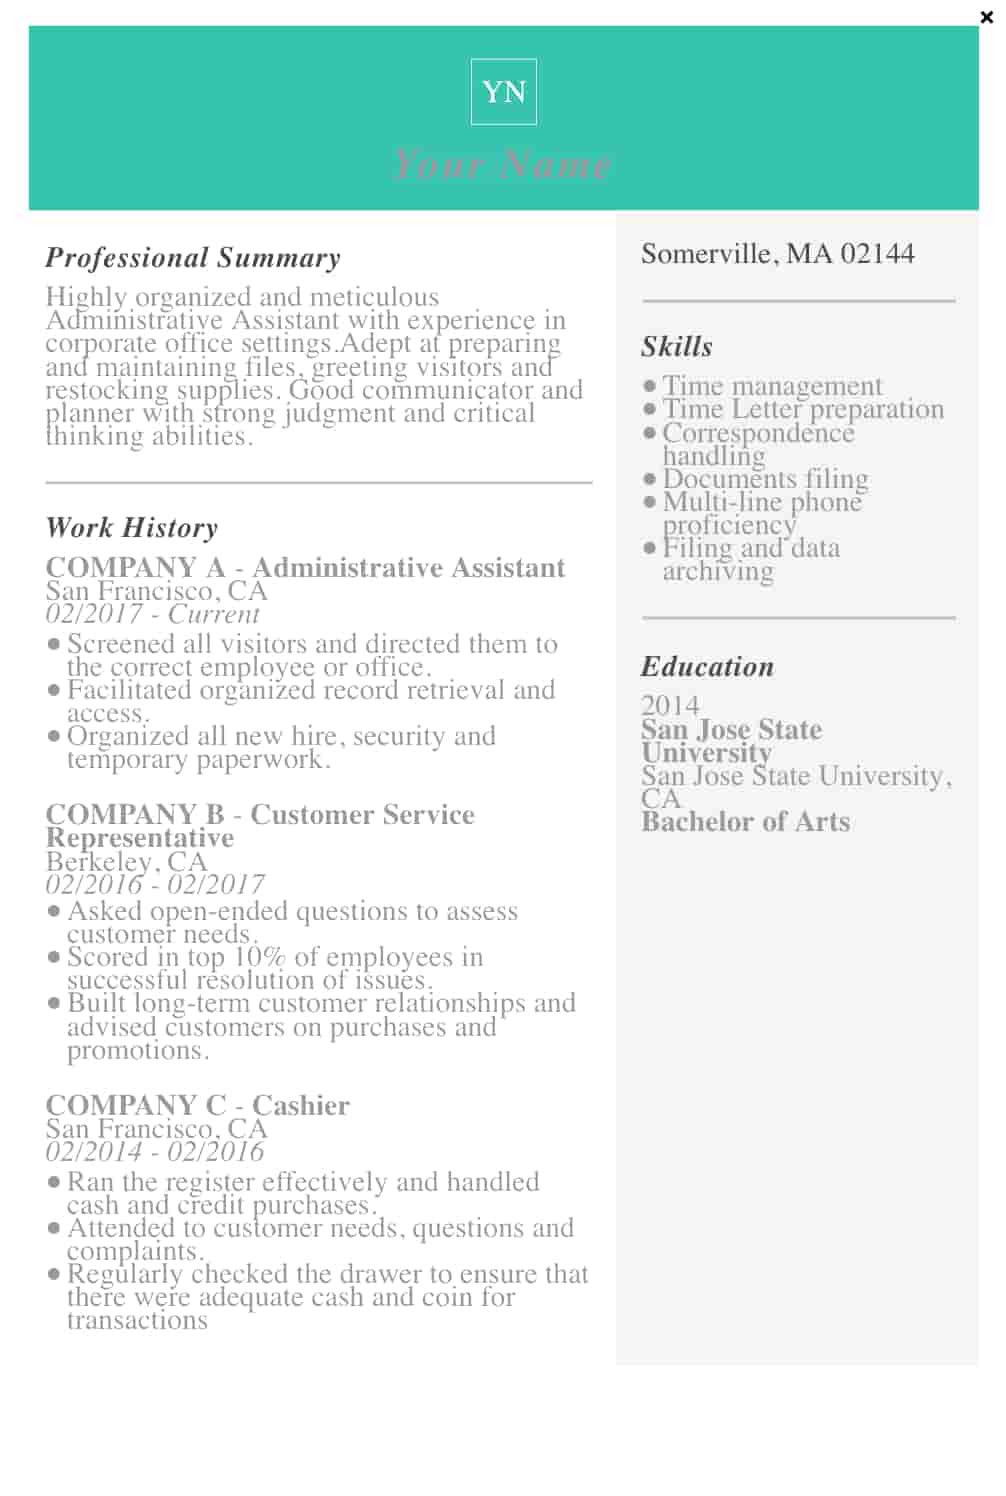 Free Resume Template for Older Worker 29 Free Resume Templates for Microsoft Word (& How to Make Your Own)